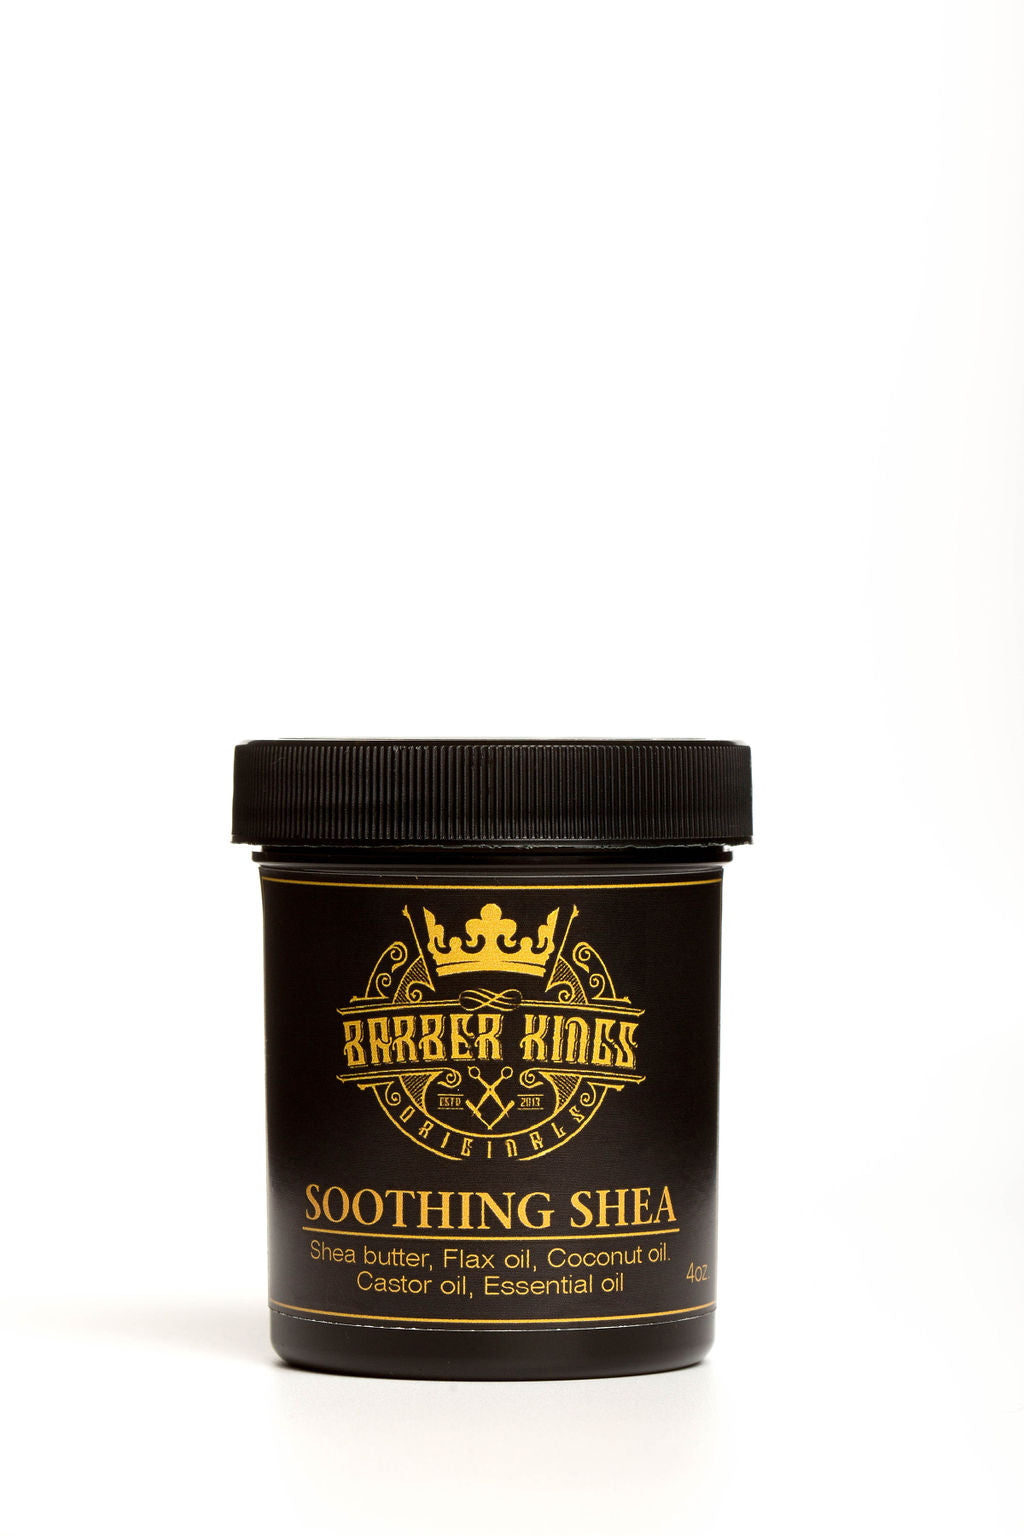 Soothing Shea Body Butter